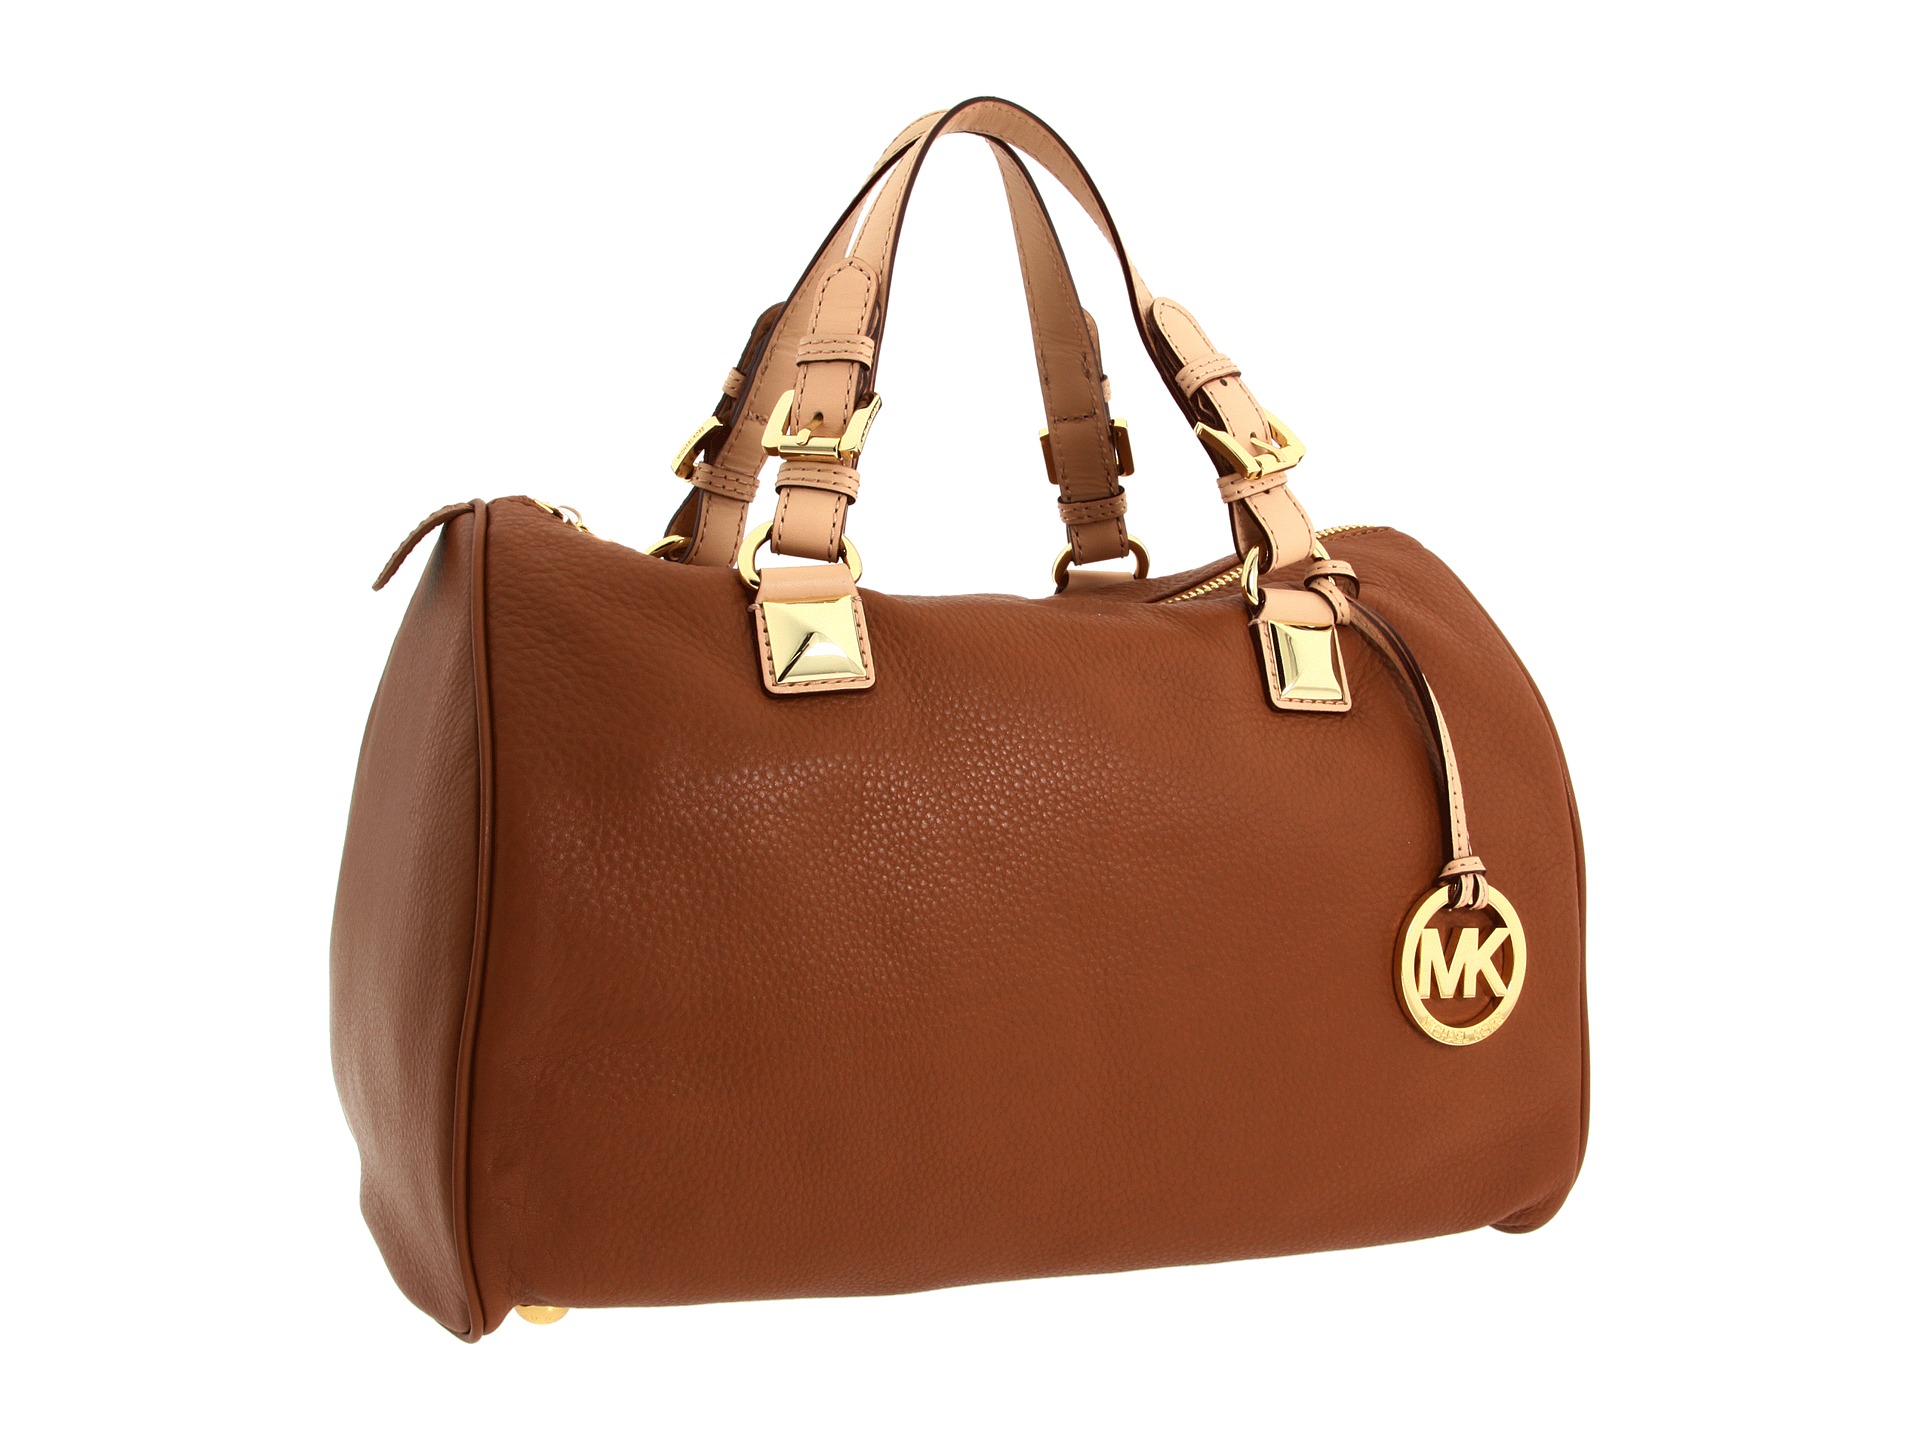   kors grayson large satchel and Women Bags” 0 items